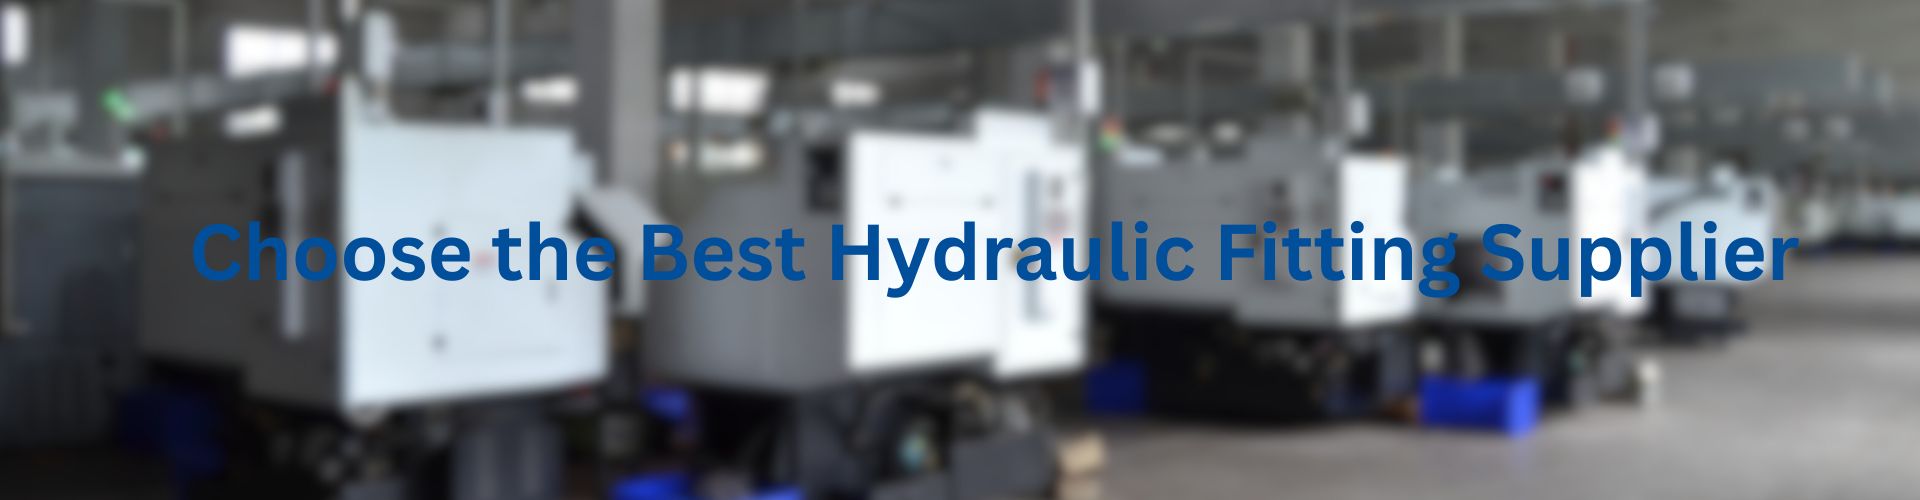 Choose the Best Hydraulic Fitting Supplier